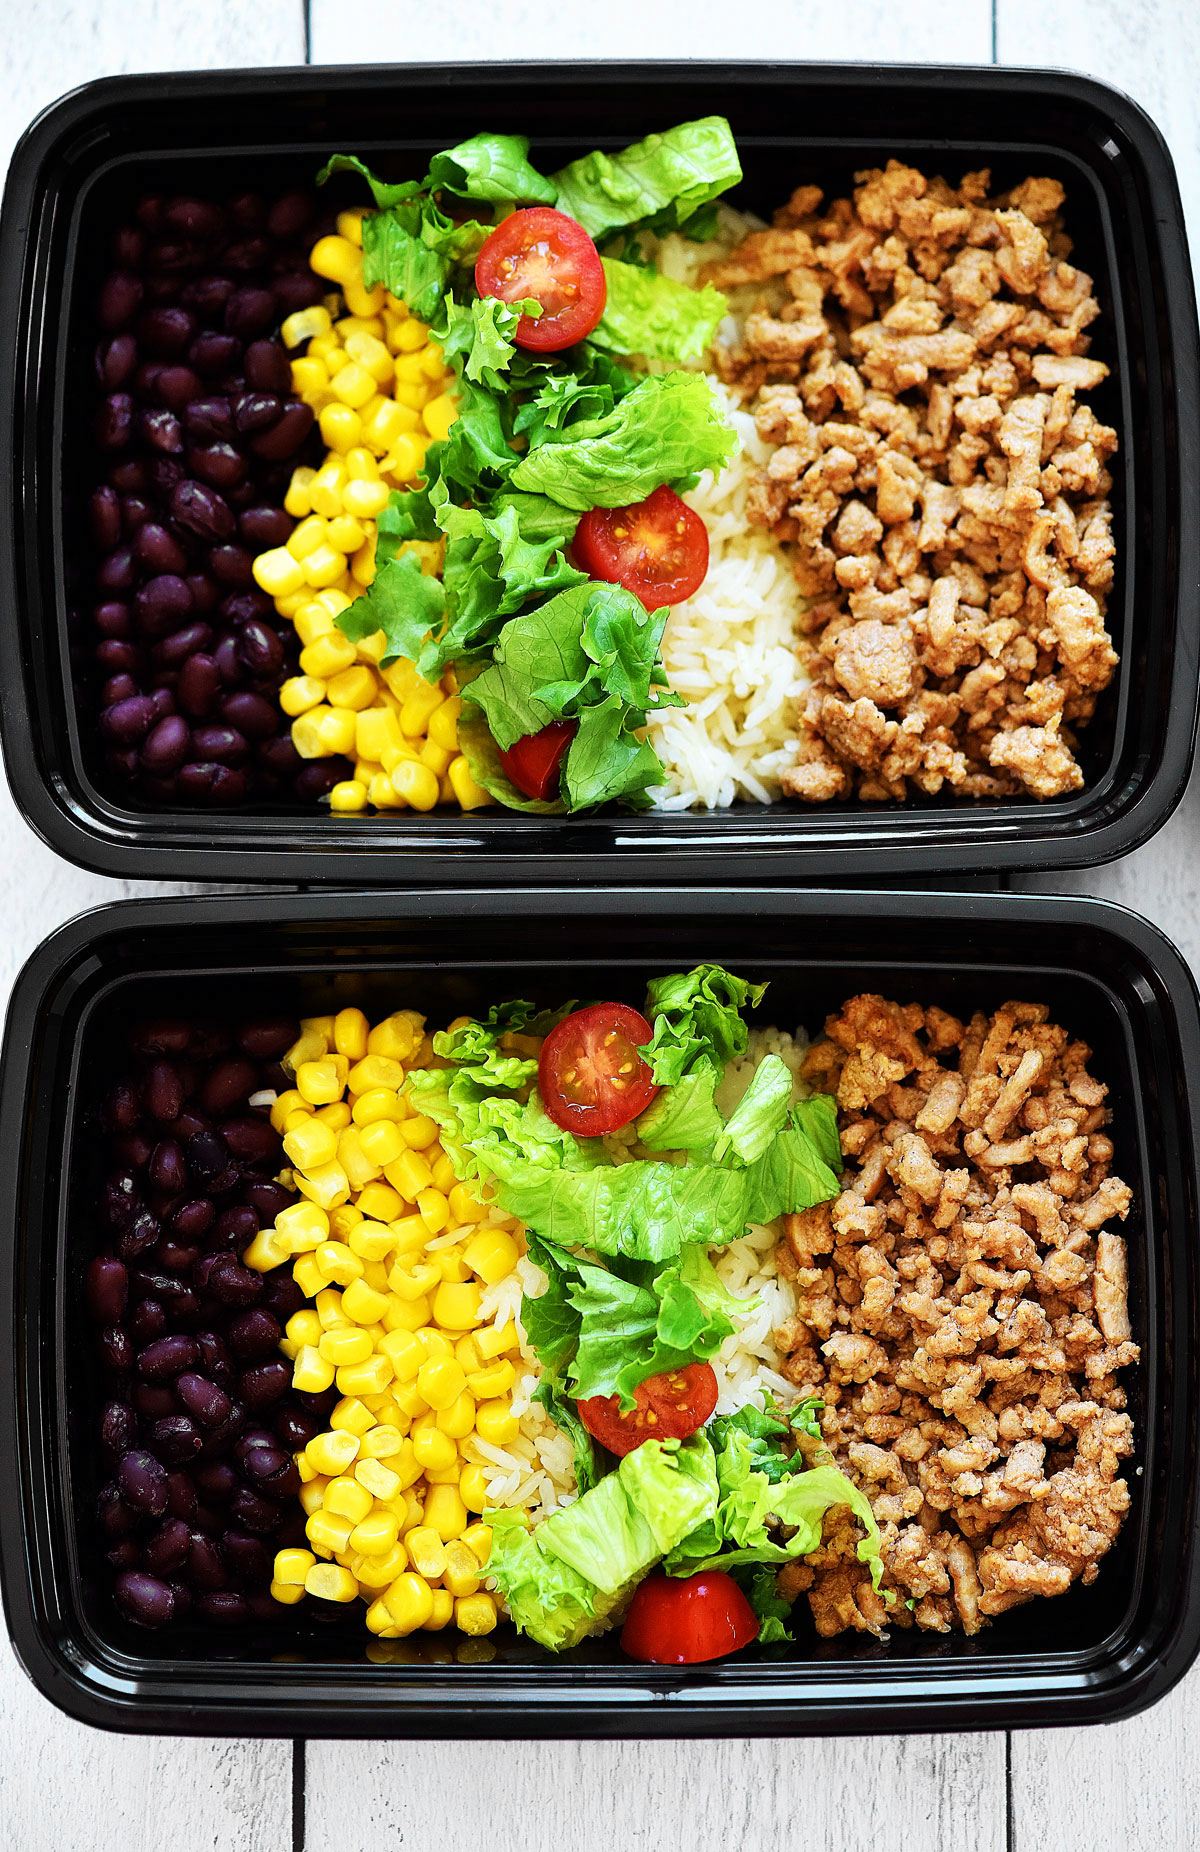 Taco Salad Meal Prep Bowls are filled with seasoned ground turkey, rice, beans, corn and lettuce. Life-in-the-Lofthouse.com